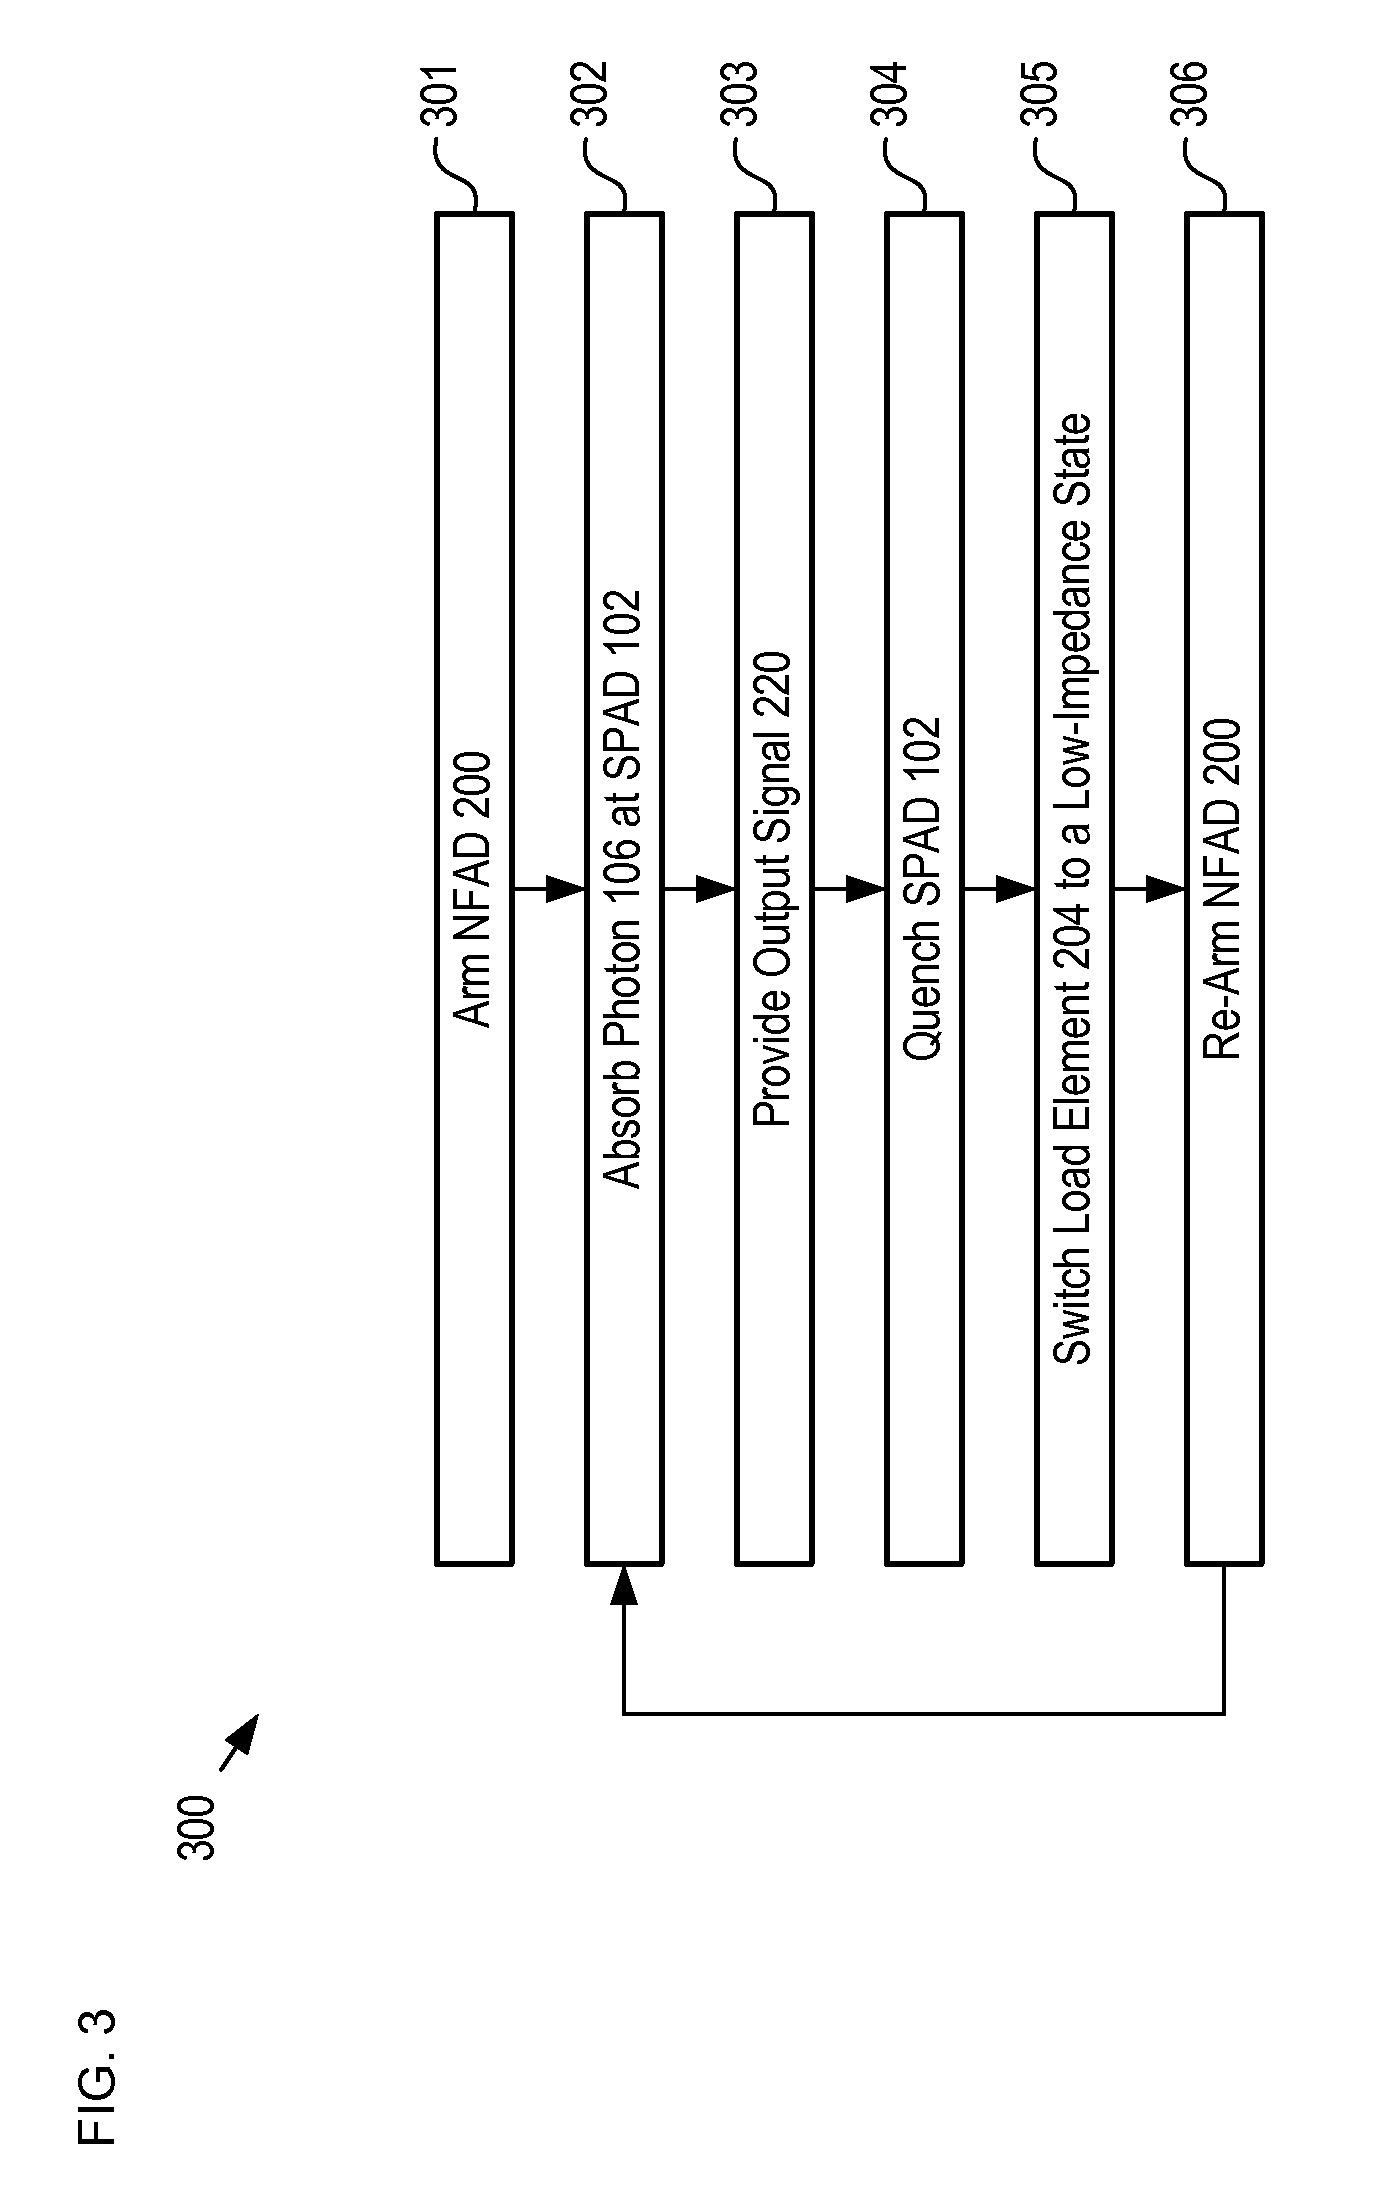 Two-state negative feedback avalanche diode having a control element for determining load state